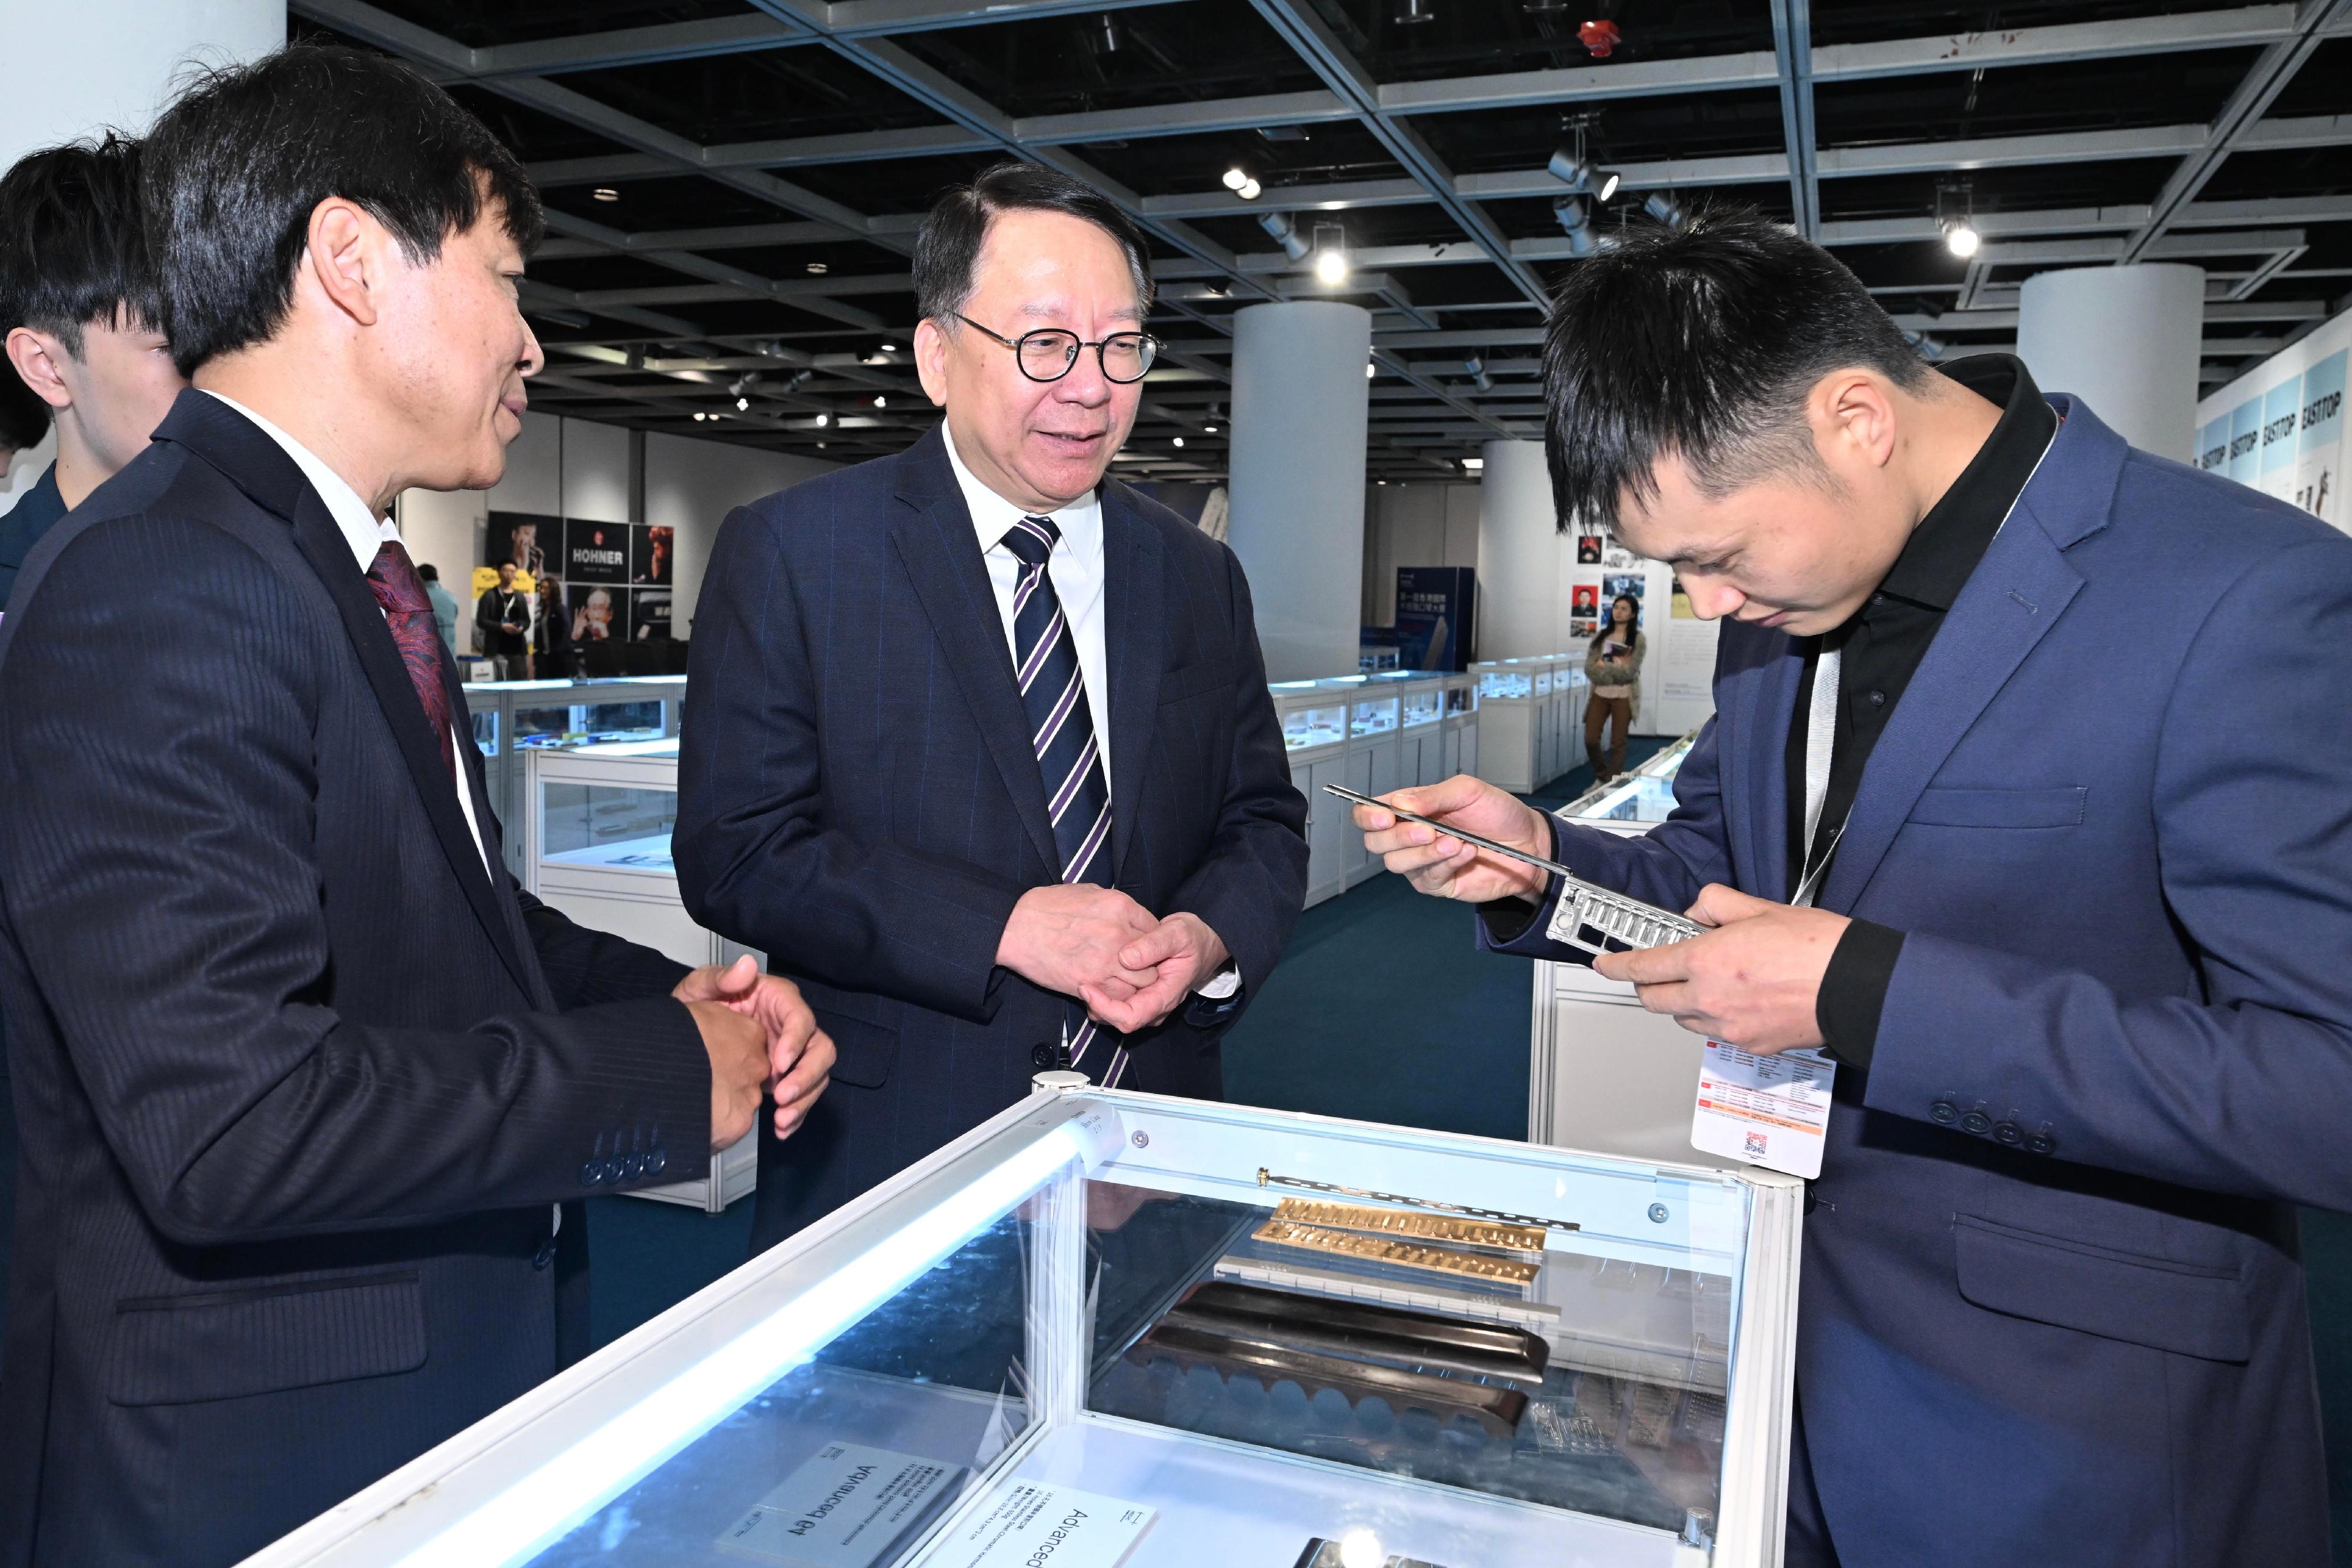 The Chief Secretary for Administration, Mr Chan Kwok-ki, attended the 1st Hong Kong International Chromatic Harmonica Competition today (April 9). Photo shows Mr Chan (centre), accompanied by the Chairman of the Steering Committee of the 1st Hong Kong International Chromatic Harmonica Competition, Dr Ho Pak-cheong (left), touring an exhibition about harmonica.